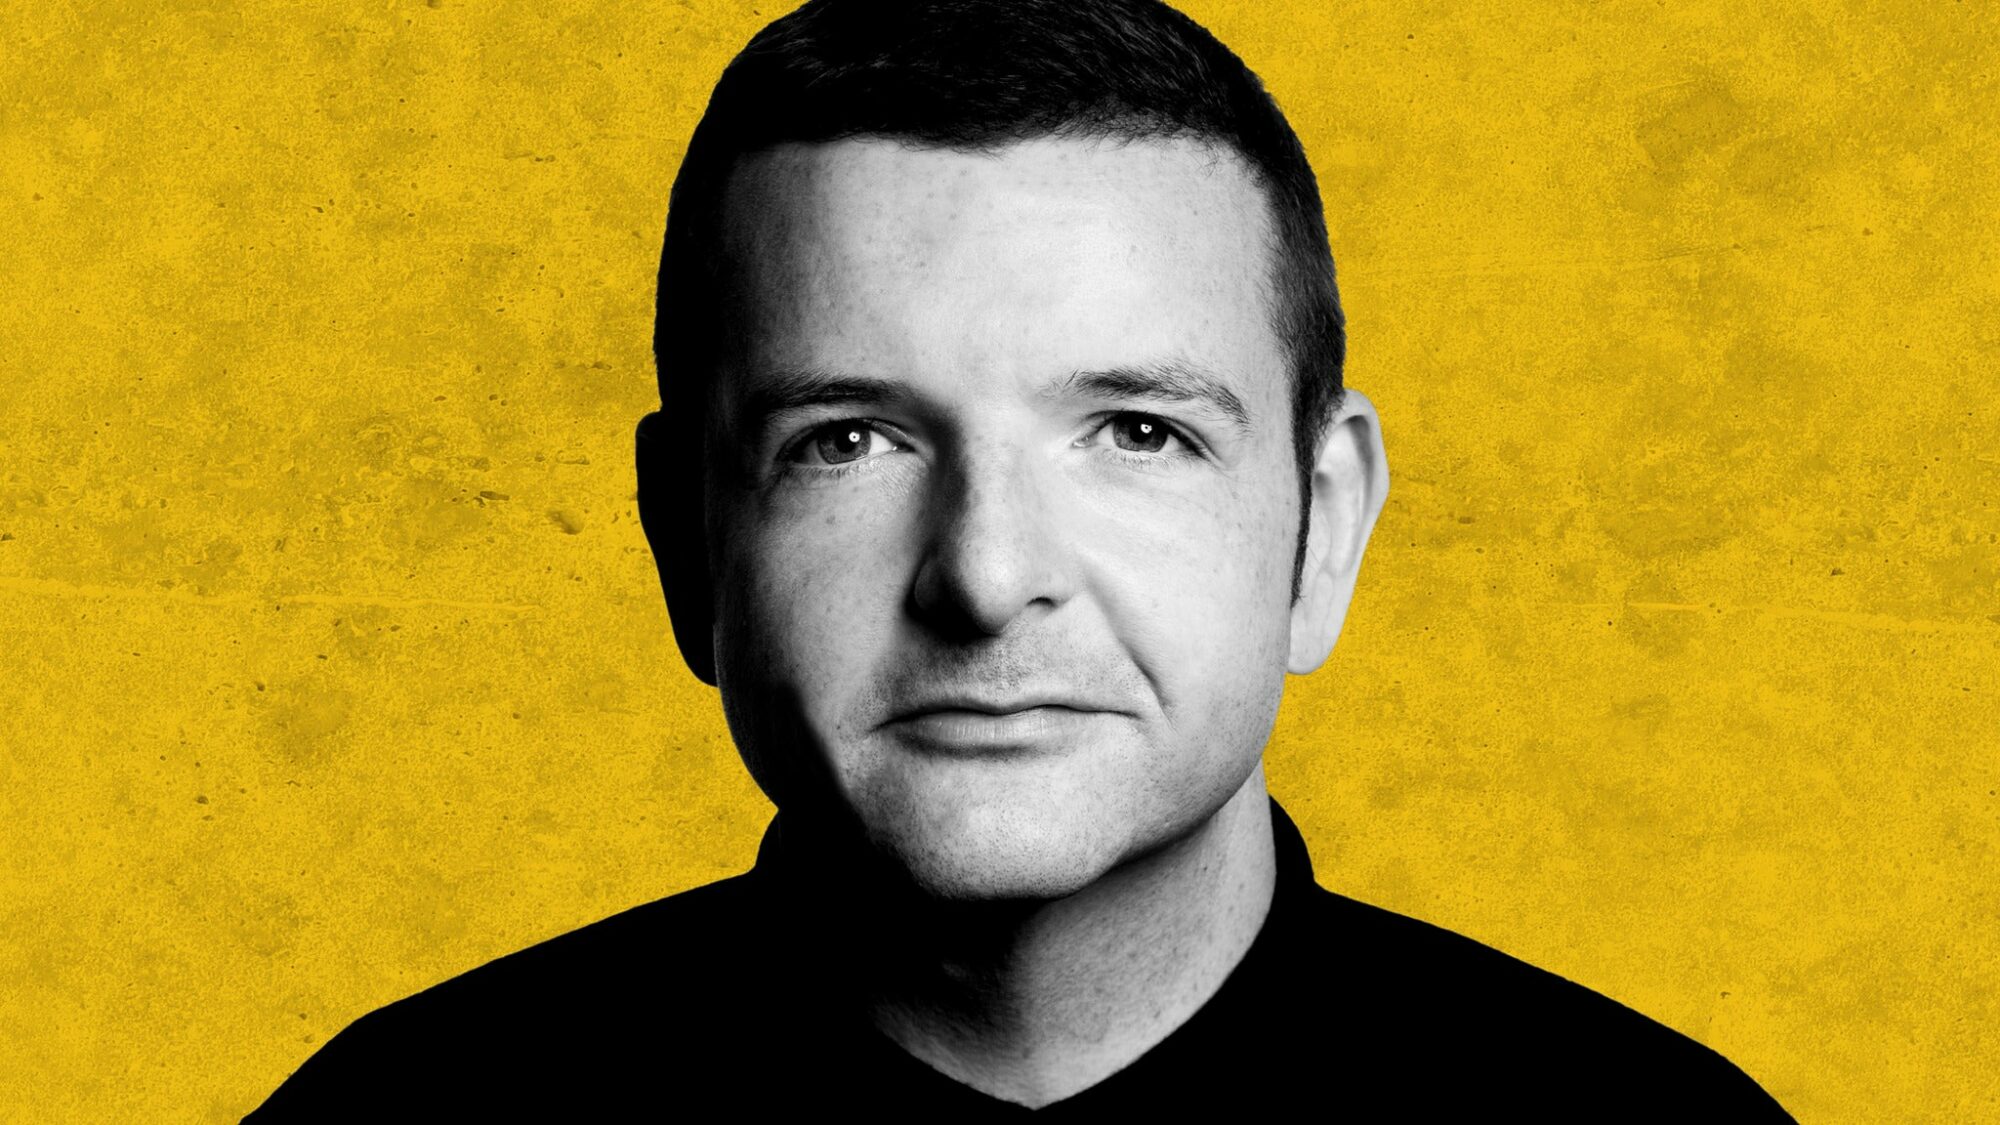 Image name Kevin Bridges The Overdue Catch Up at Leeds Grand Theatre Leeds the 7 image from the post Kevin Bridges: The Overdue Catch-Up at Leeds Grand Theatre, Leeds in Yorkshire.com.